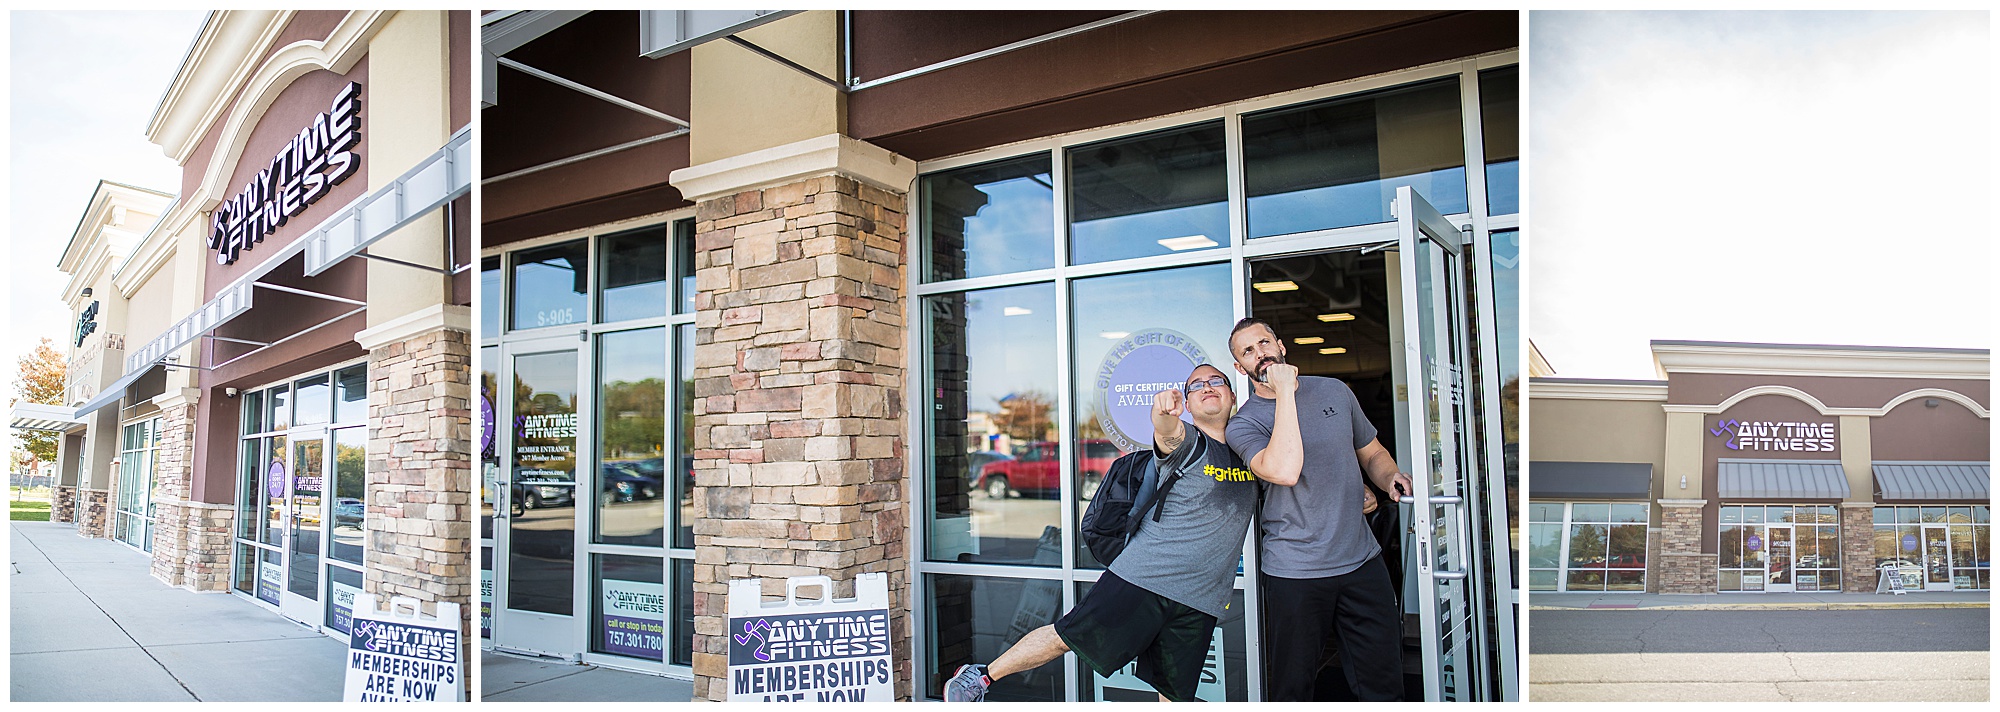 anytime fitness landstown, anytime fitness, misty saves the day, virginia beach fitness photography